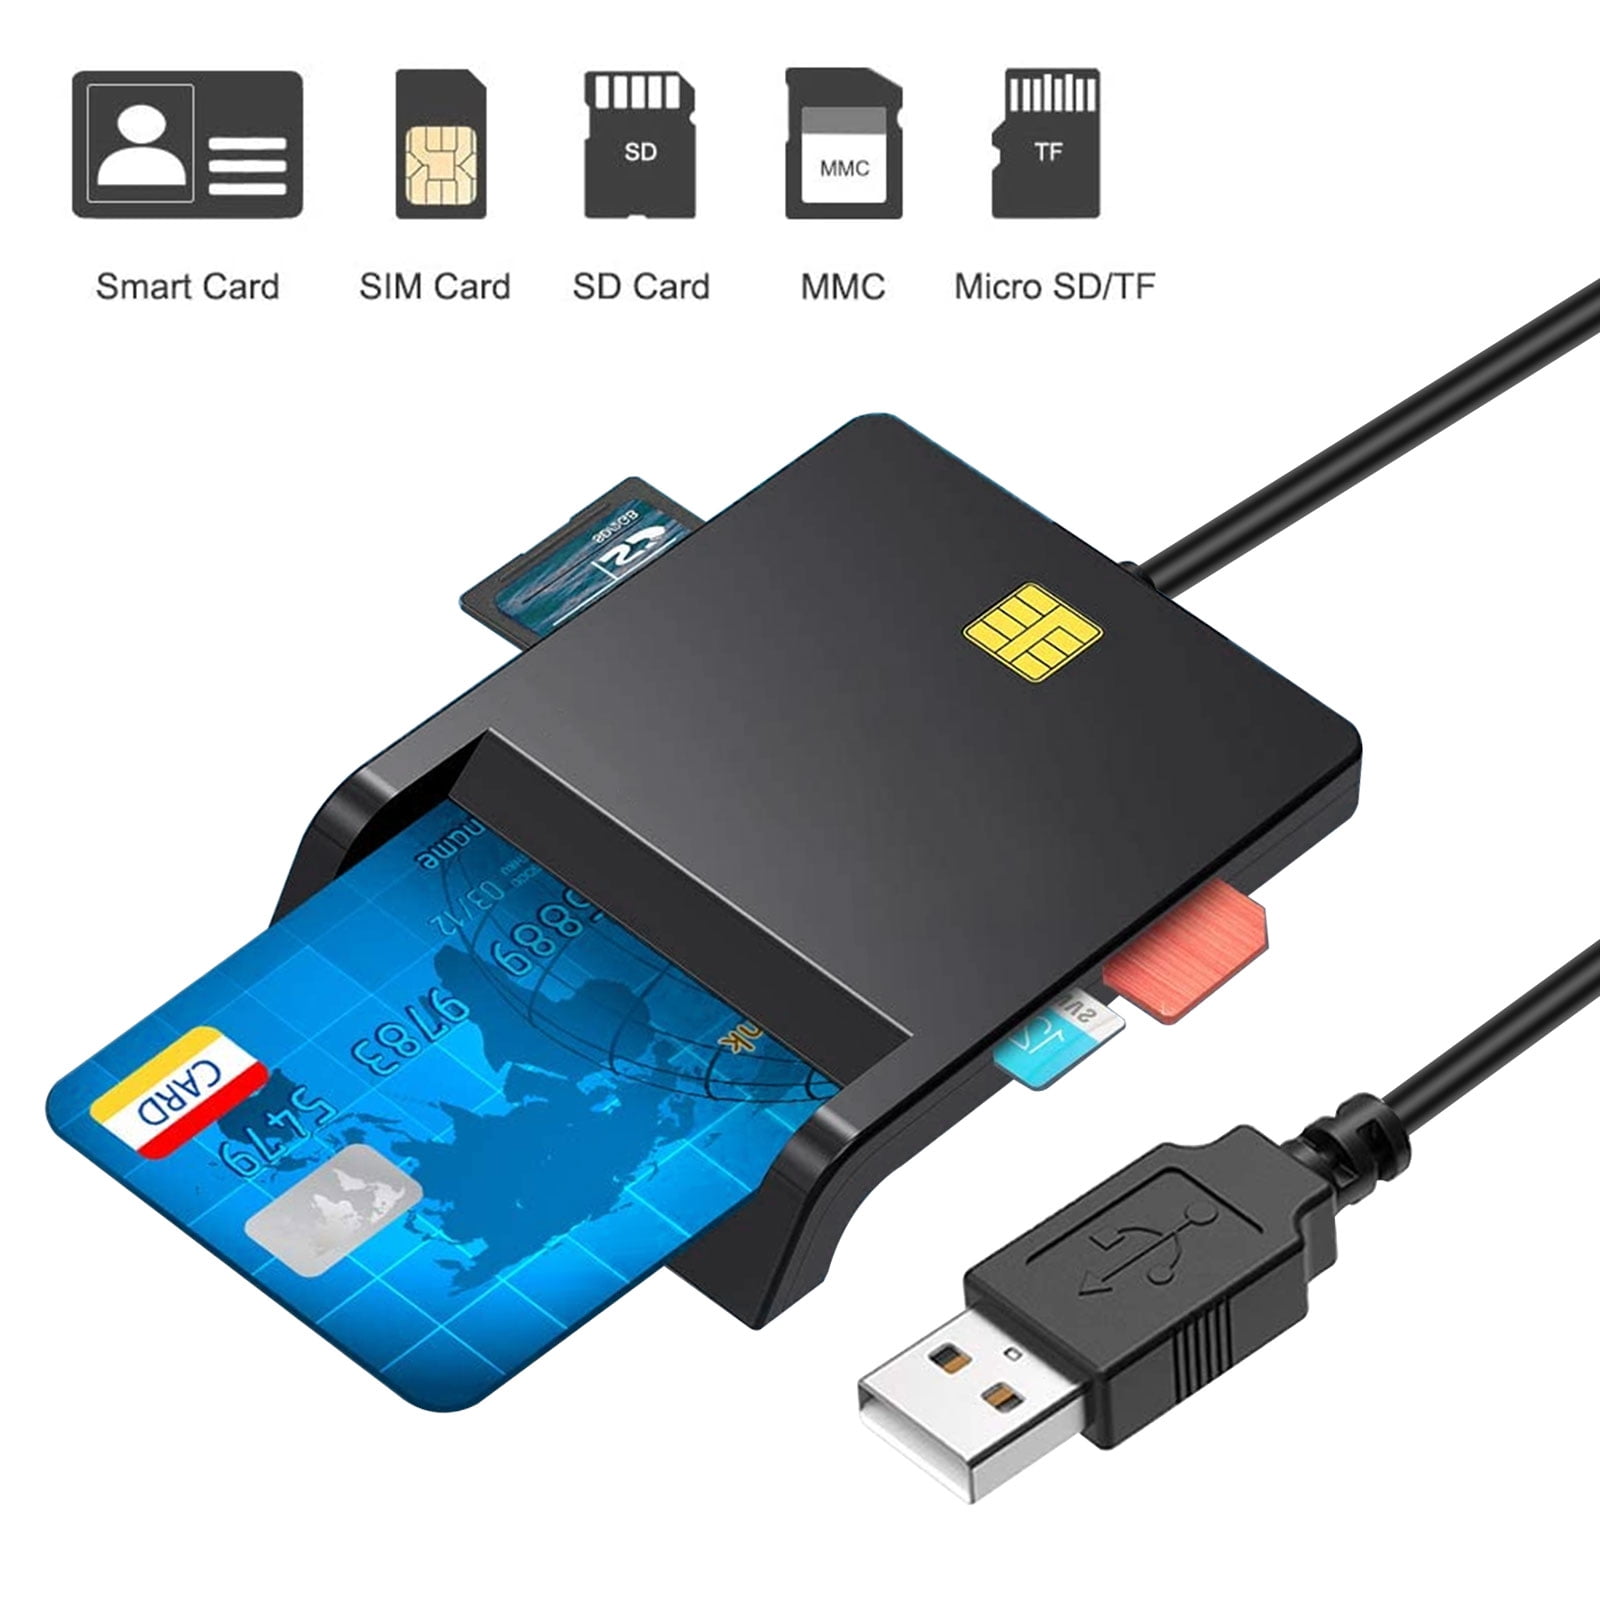 USB Smart Card Reader, DOD USB CAC Memory Card Reader compatible with Windows, Linux/Unix, MacOS X - Build in SDHC/SDXC/SD Reader & Micro SD Card - Walmart.com